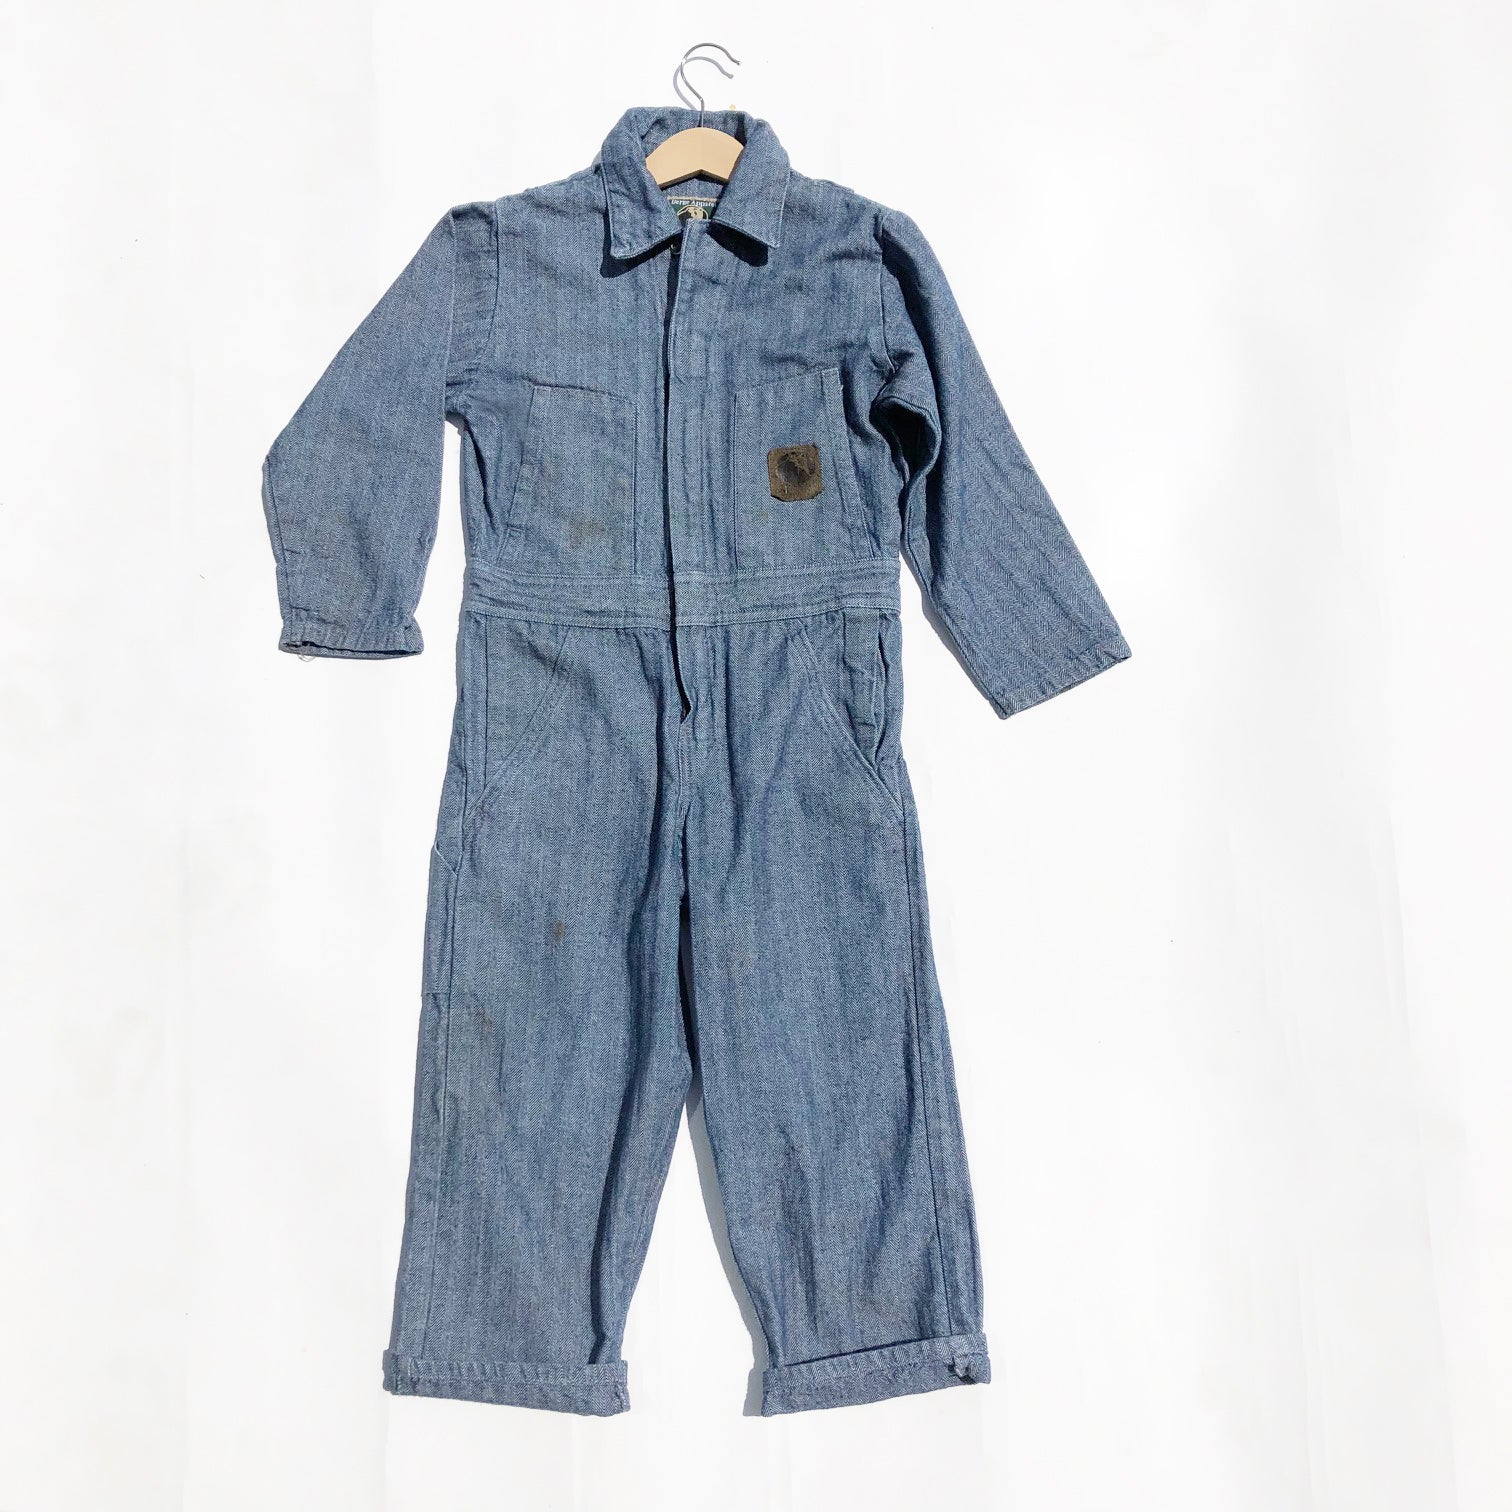 The Perfect Vintage Coveralls in Hickory Herringbone Fabric size 7-9